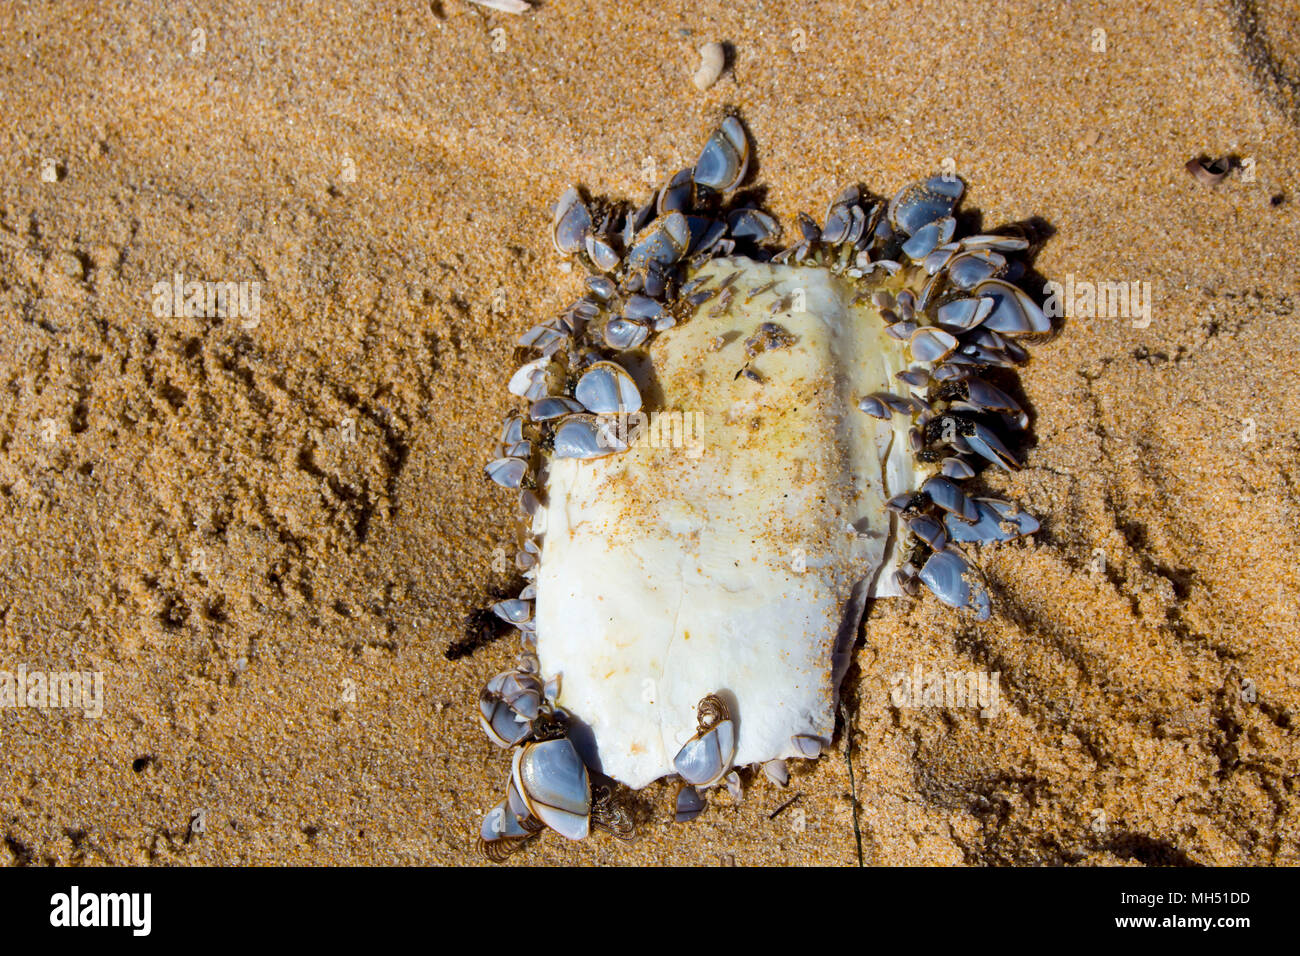 Cuttlefish or cuttles marine animals of the order Sepiida of the class Cephalopoda,  squid, octopuses, and nautiluses with clams lying on Ocean Beach. Stock Photo